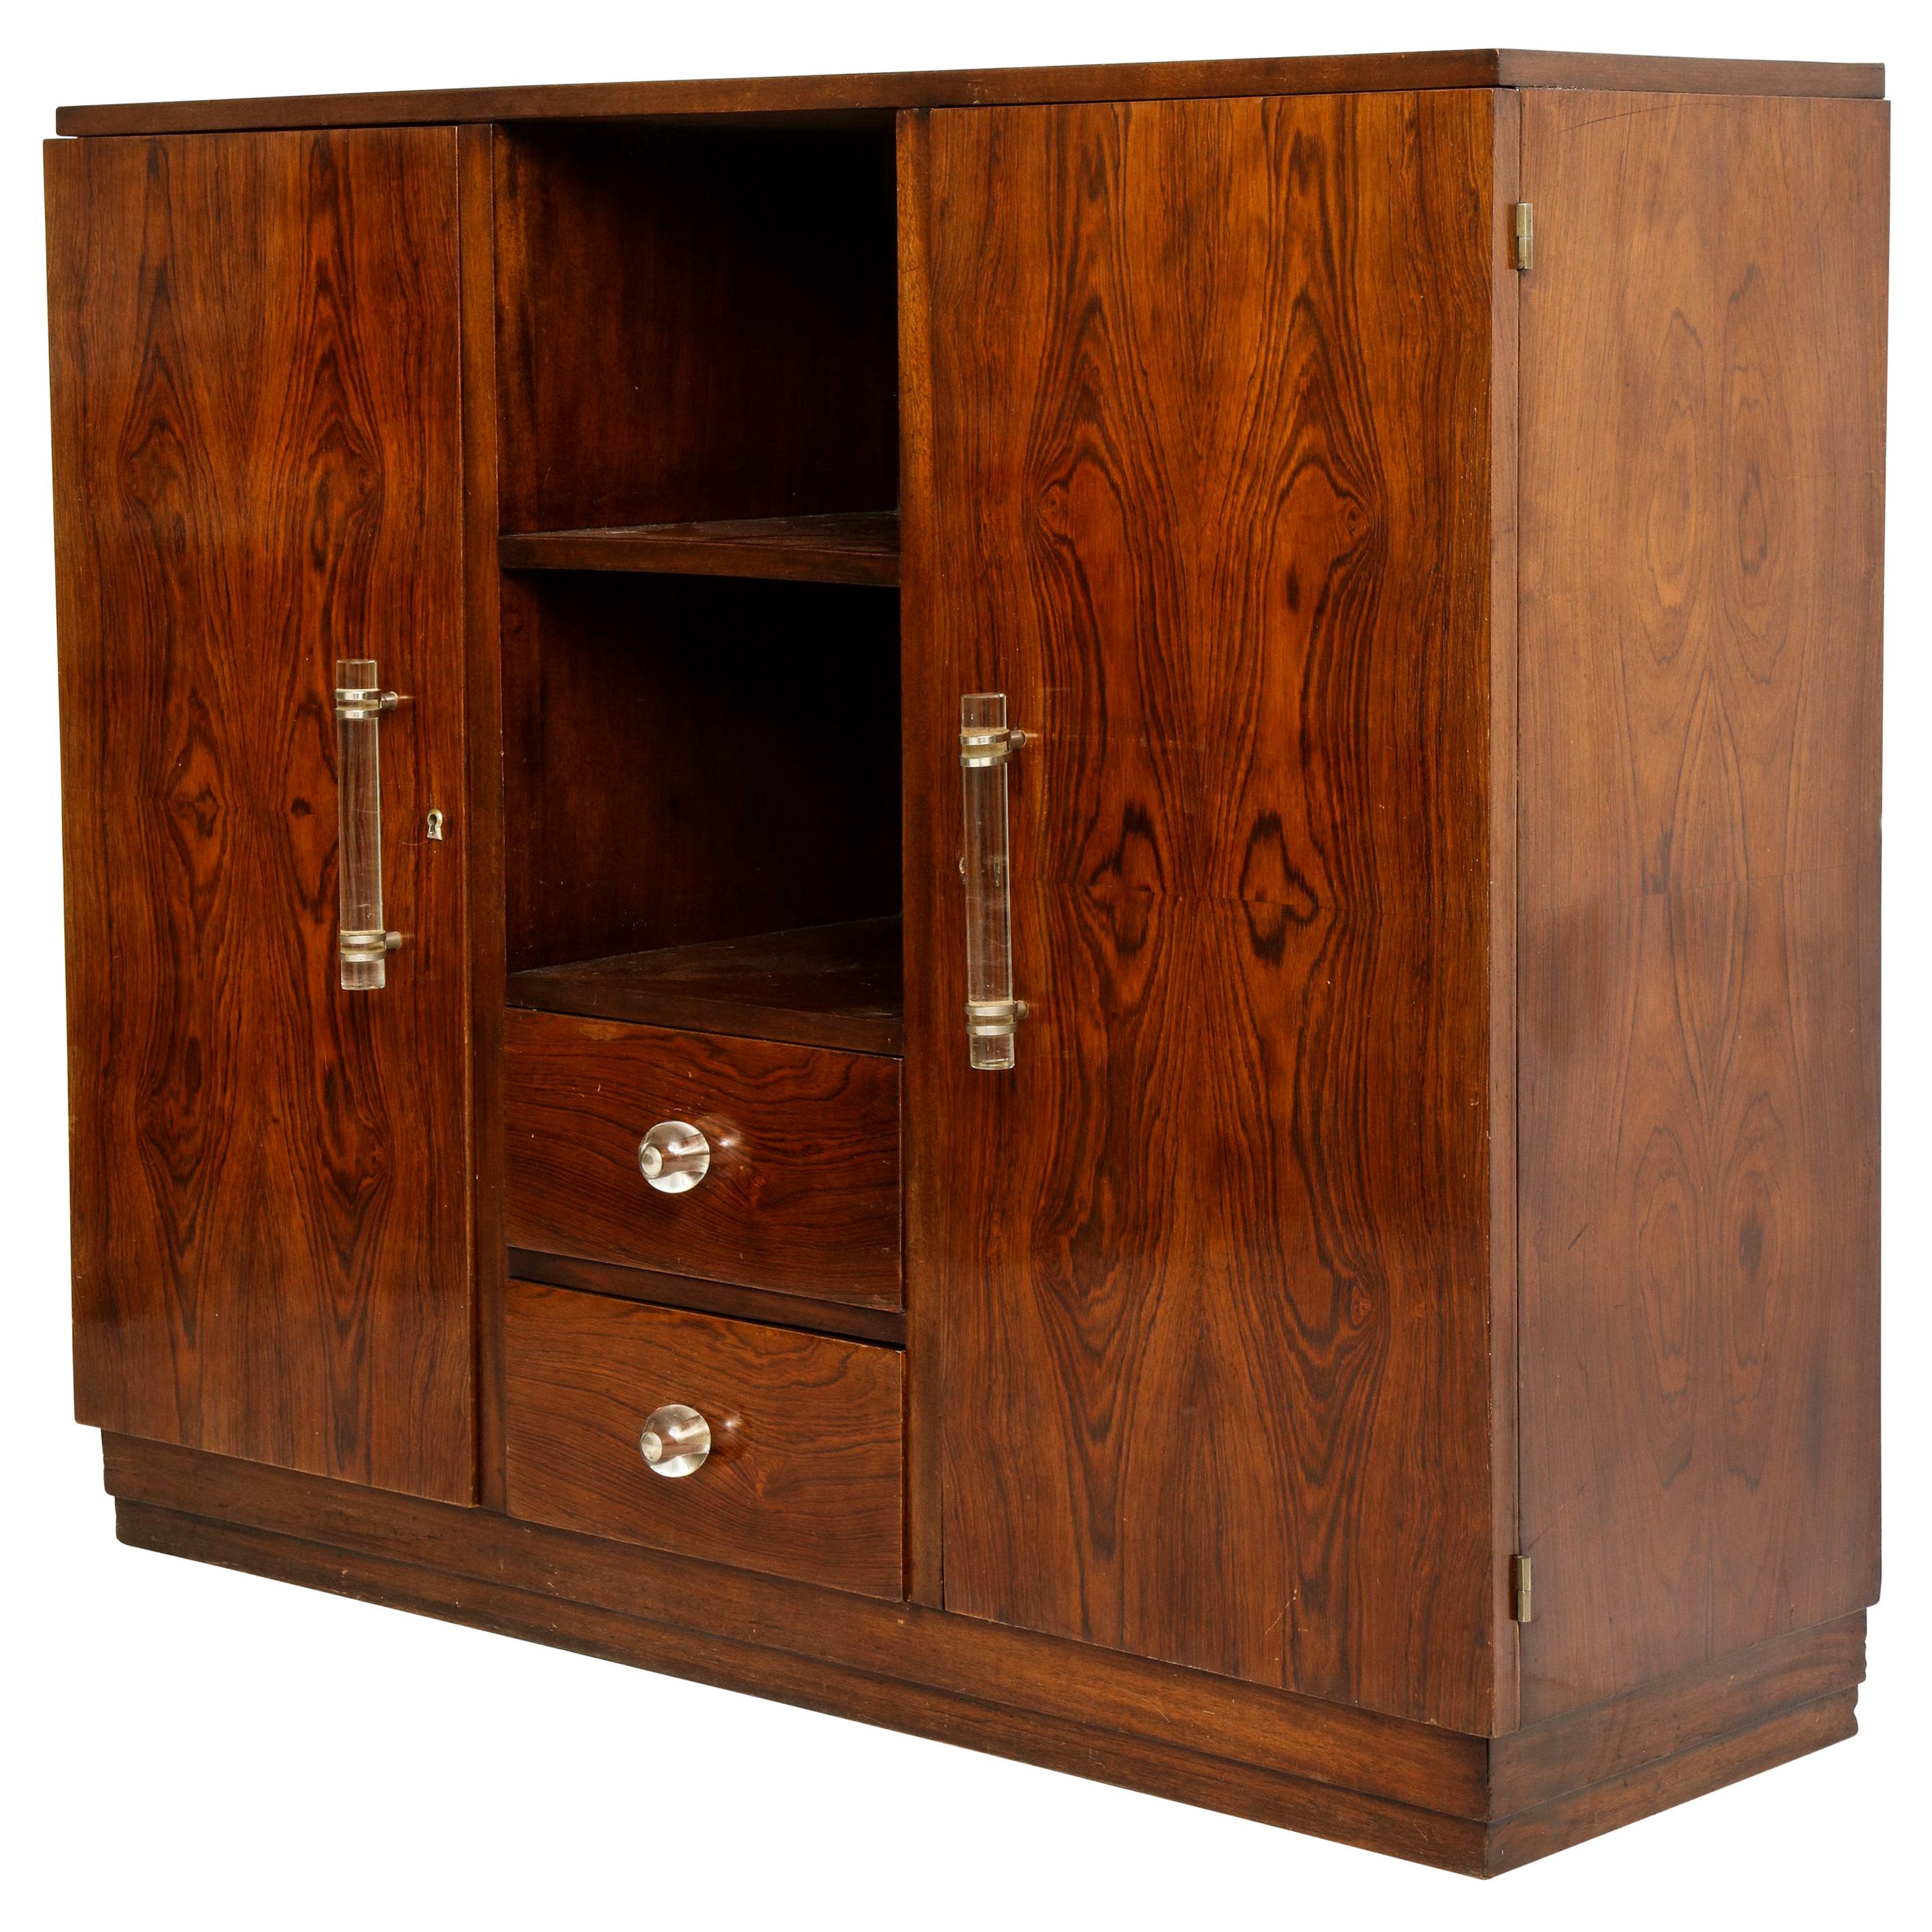 Rosewood, deco cabinet with glass handles in the style of Jacques Adnet, France, 1940. 

Handsome solid rosewood cabinet in lovely vintage condition. Similar to pieces made by Jacques Adnet at this time. Heavy and great patina.